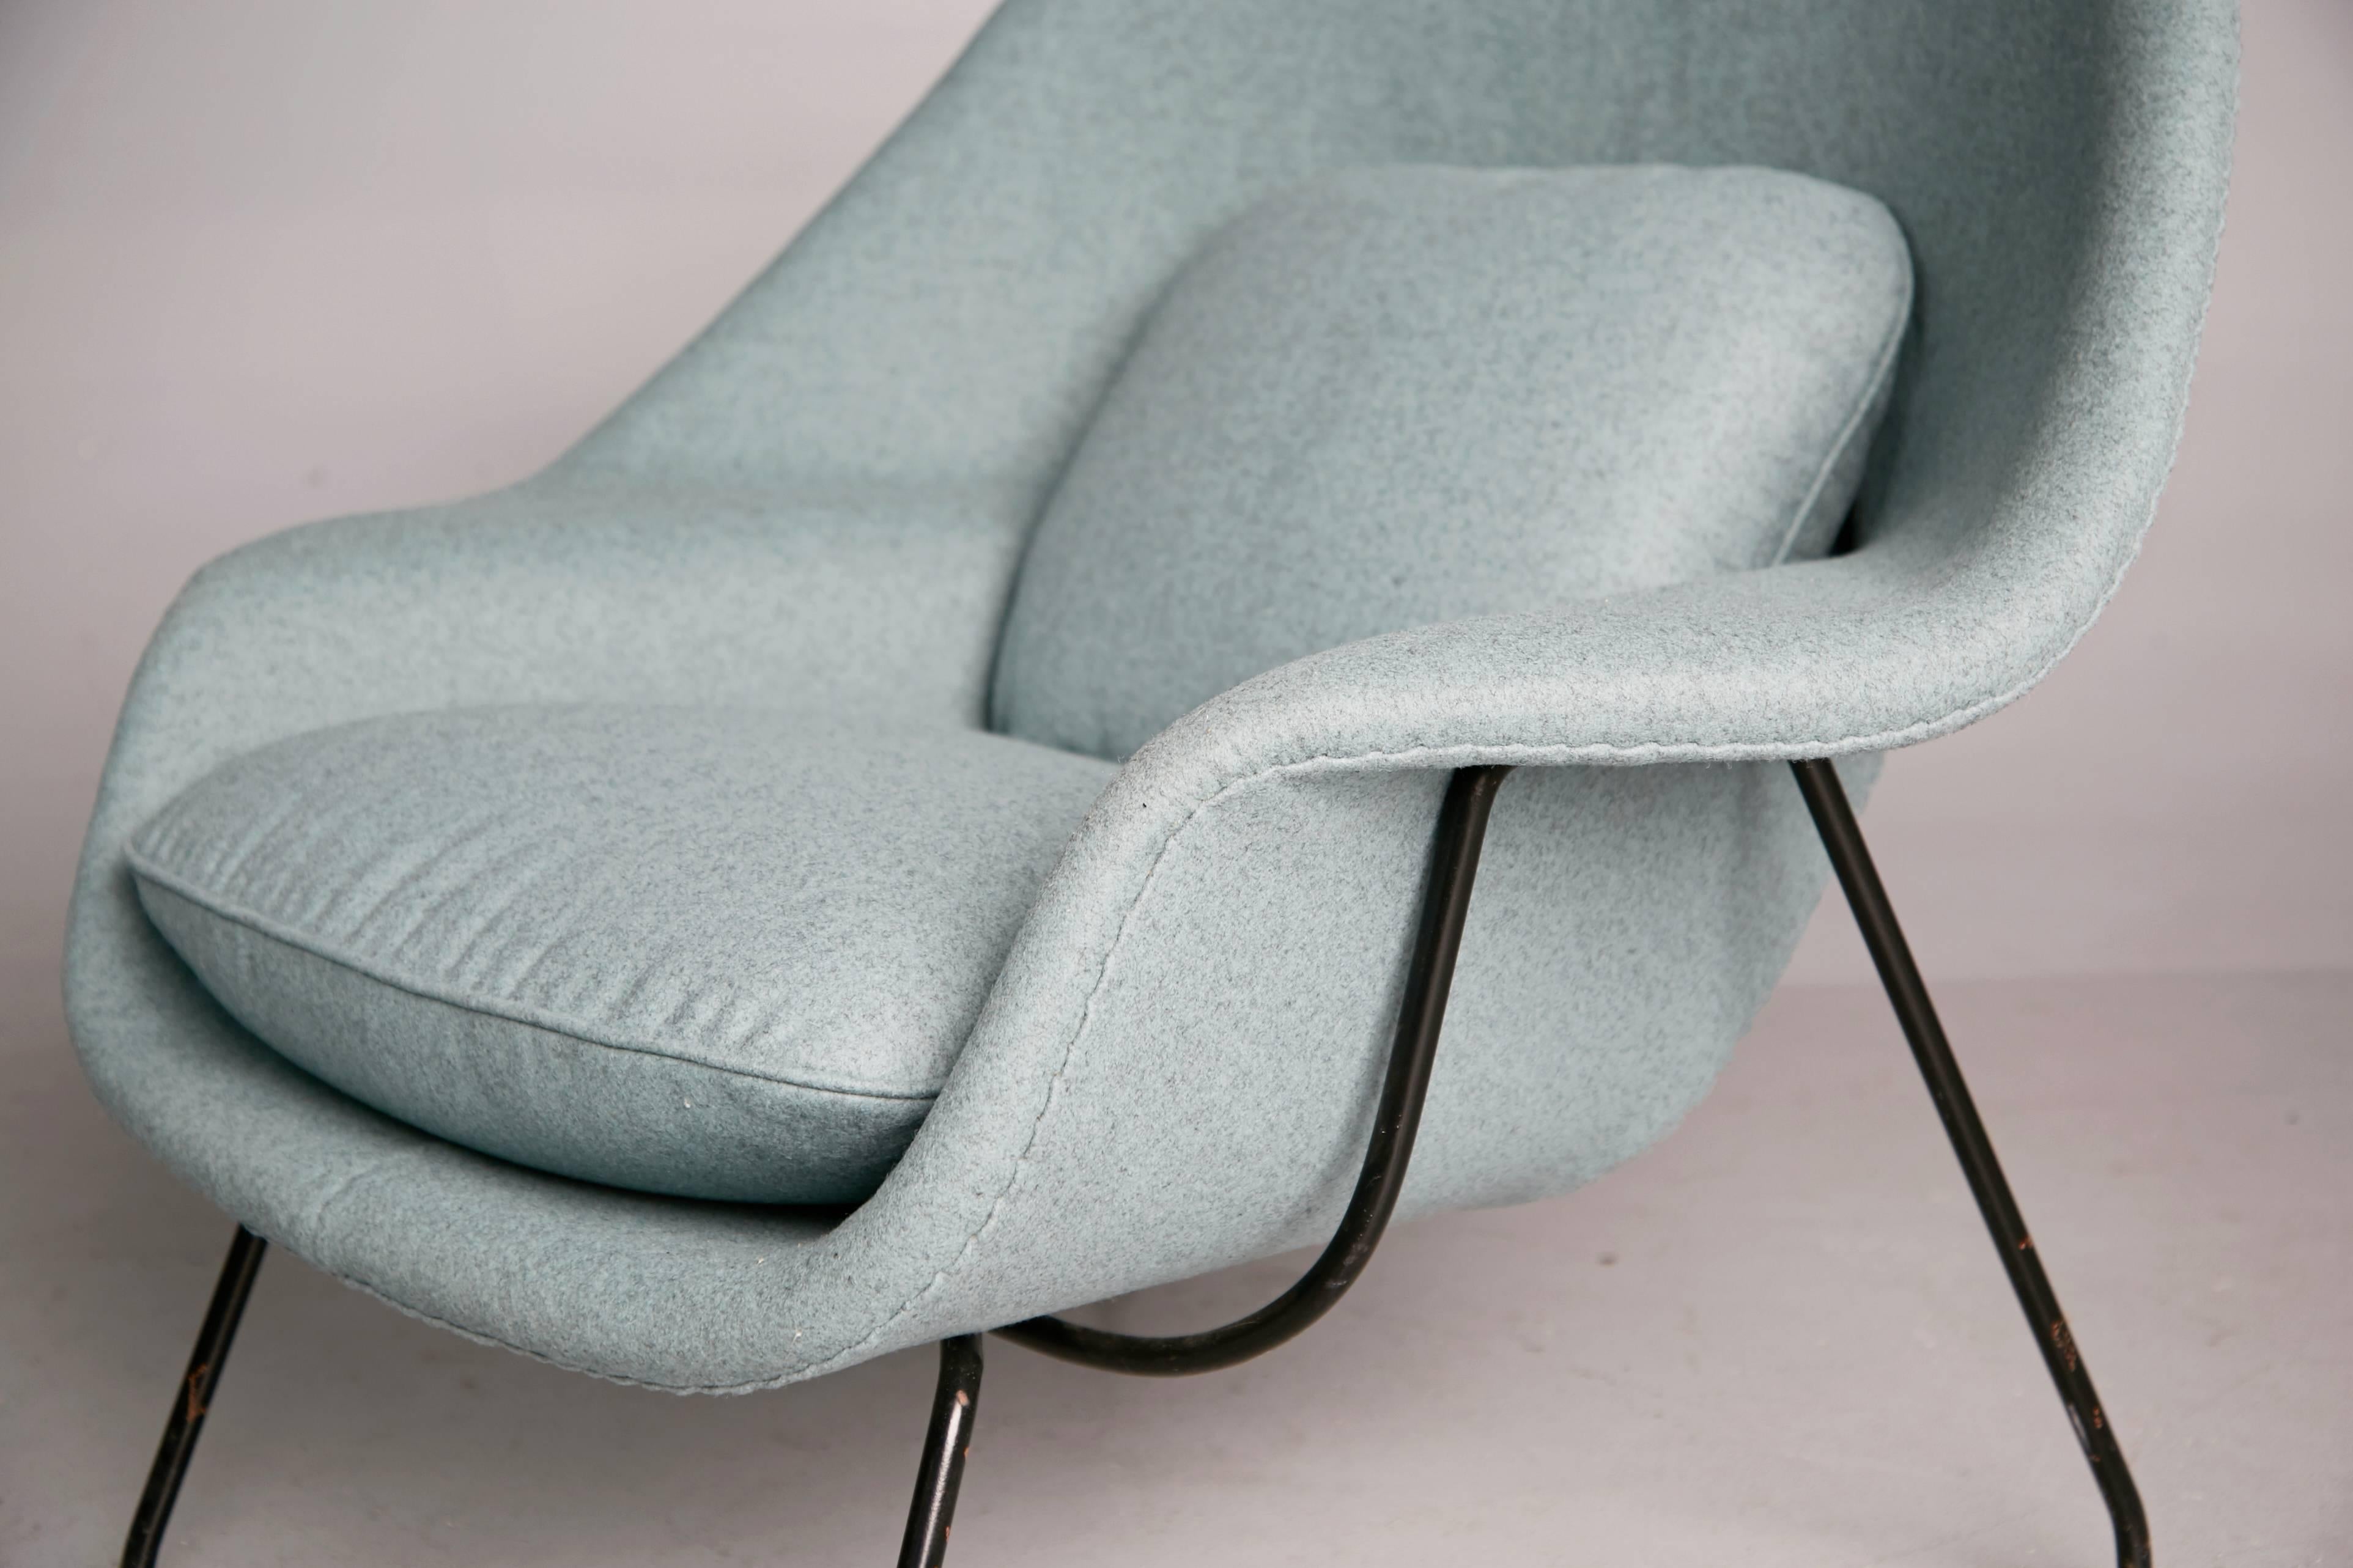 Mid-20th Century Newly Upholstered Womb Chair by Eero Saarinen for Knoll, circa 1950